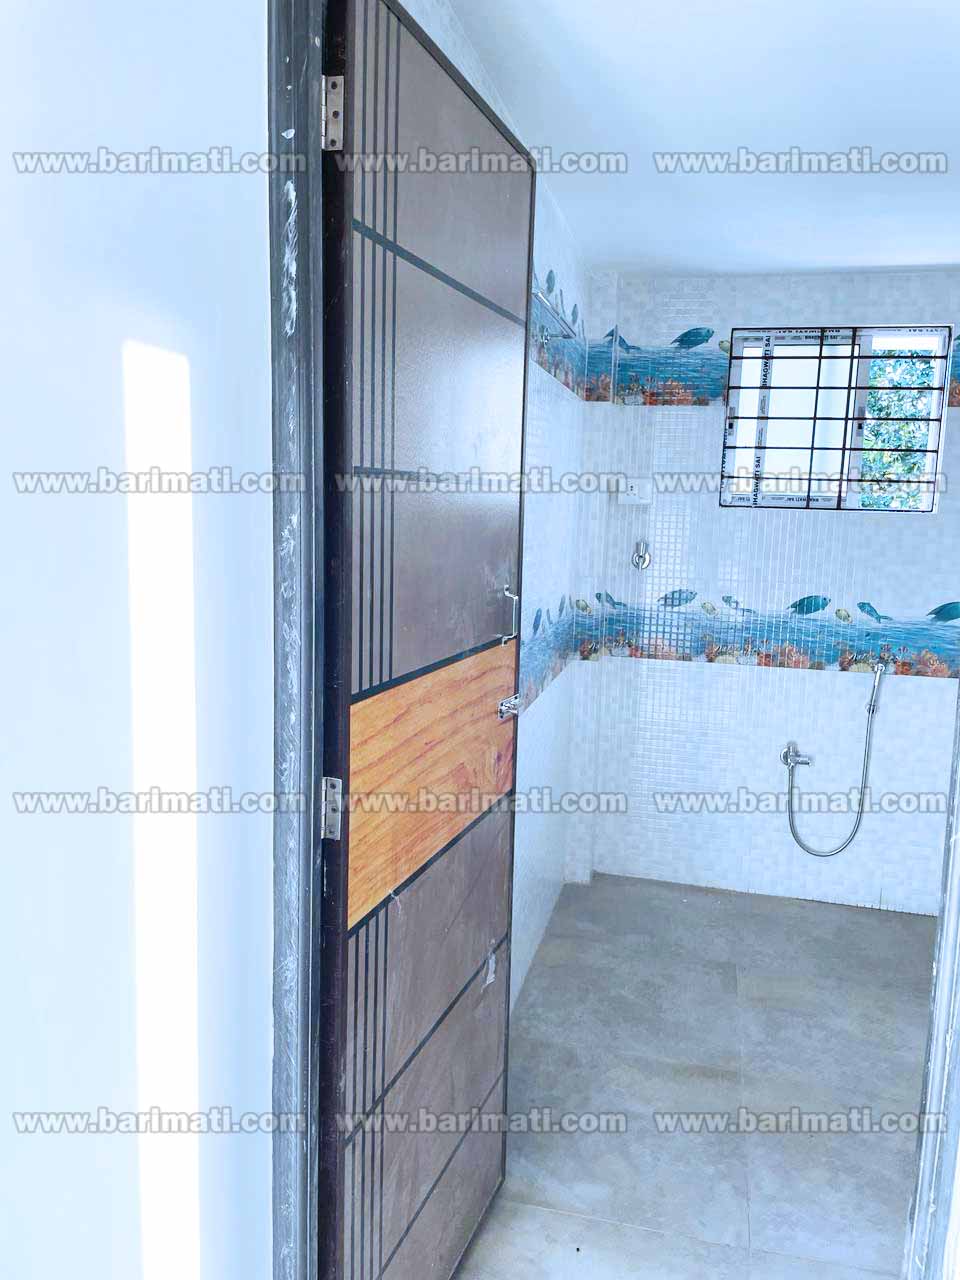 2 BHK flat in Duarachuk, conveniently located near Dibrugarh University, available for rent within a budget of 15000 per month